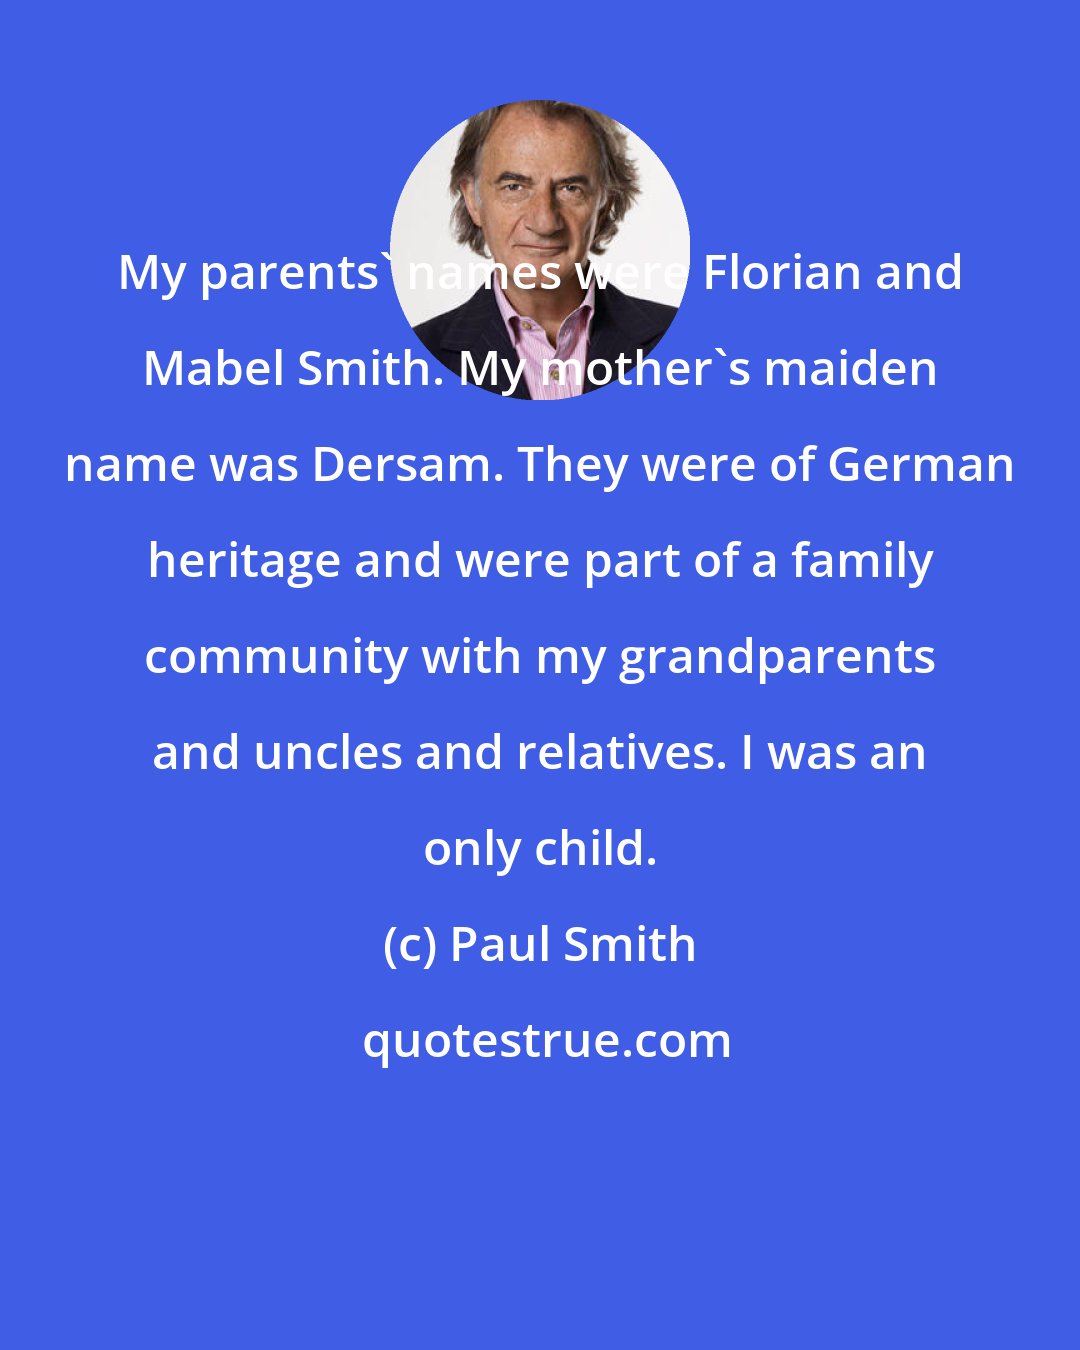 Paul Smith: My parents' names were Florian and Mabel Smith. My mother's maiden name was Dersam. They were of German heritage and were part of a family community with my grandparents and uncles and relatives. I was an only child.